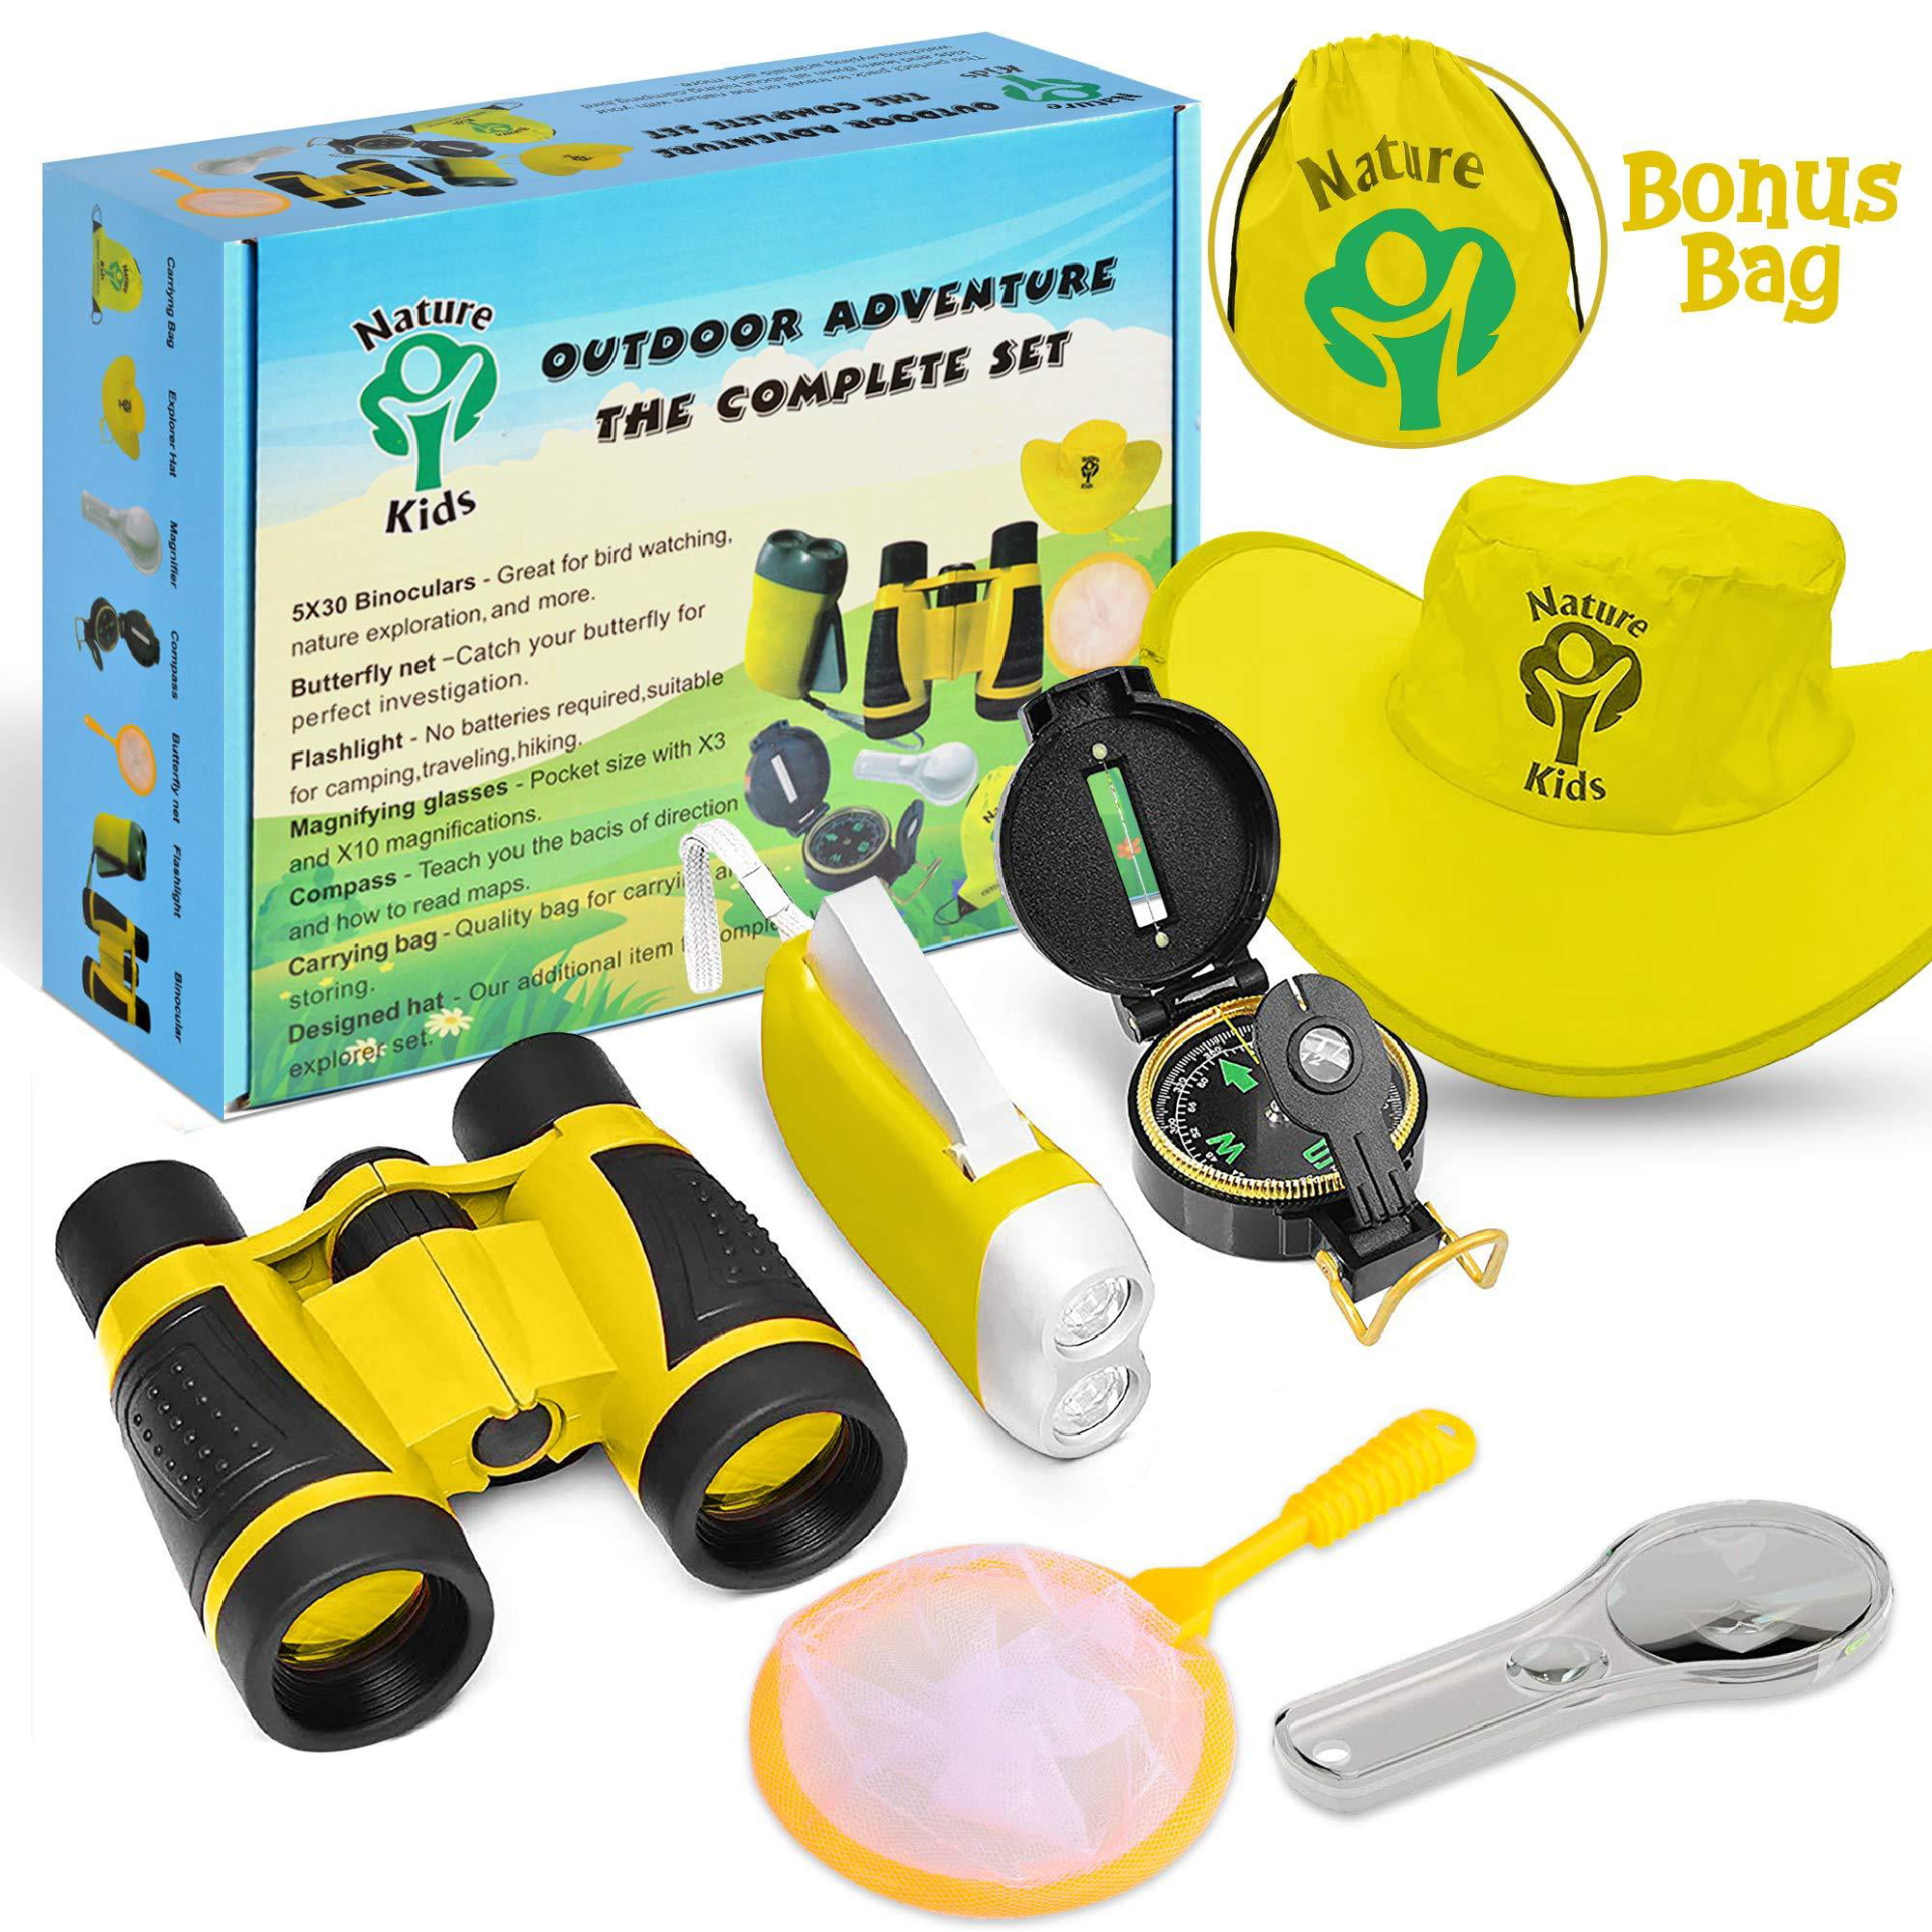 Magnifying Glass Backyard JUOIFIP Adventure Kids Compass Outdoor Explorer Exploration Childrens Toys Kit- Binoculars Camping Whistle Butterfly Net for Educational Hiking Flashlight 